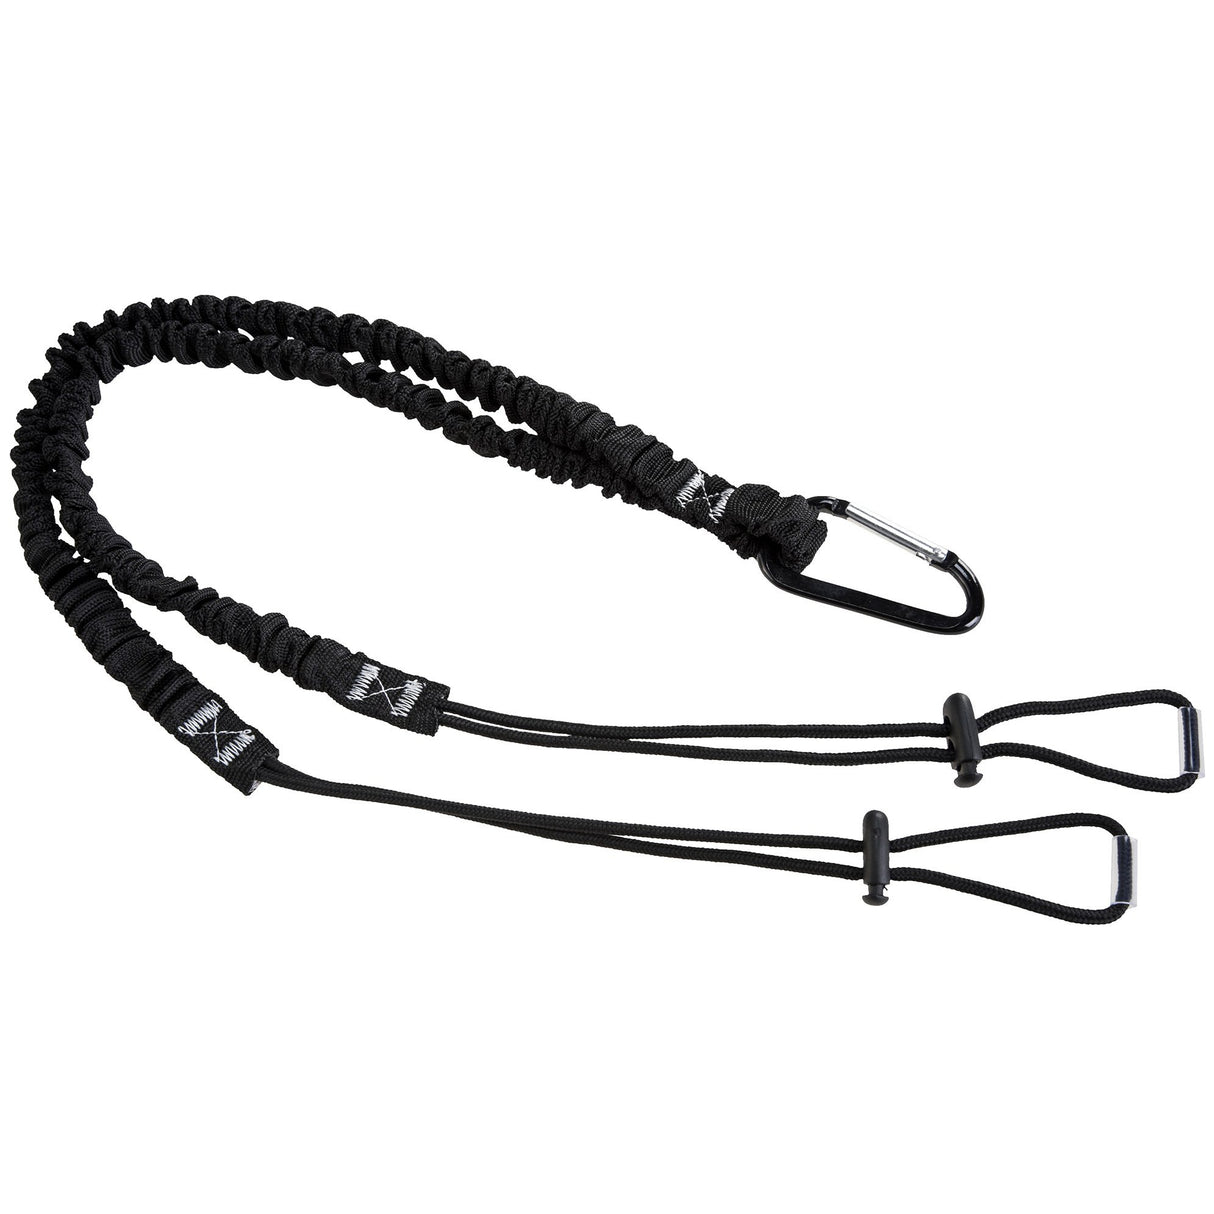 Portwest Double Tool Lanyard